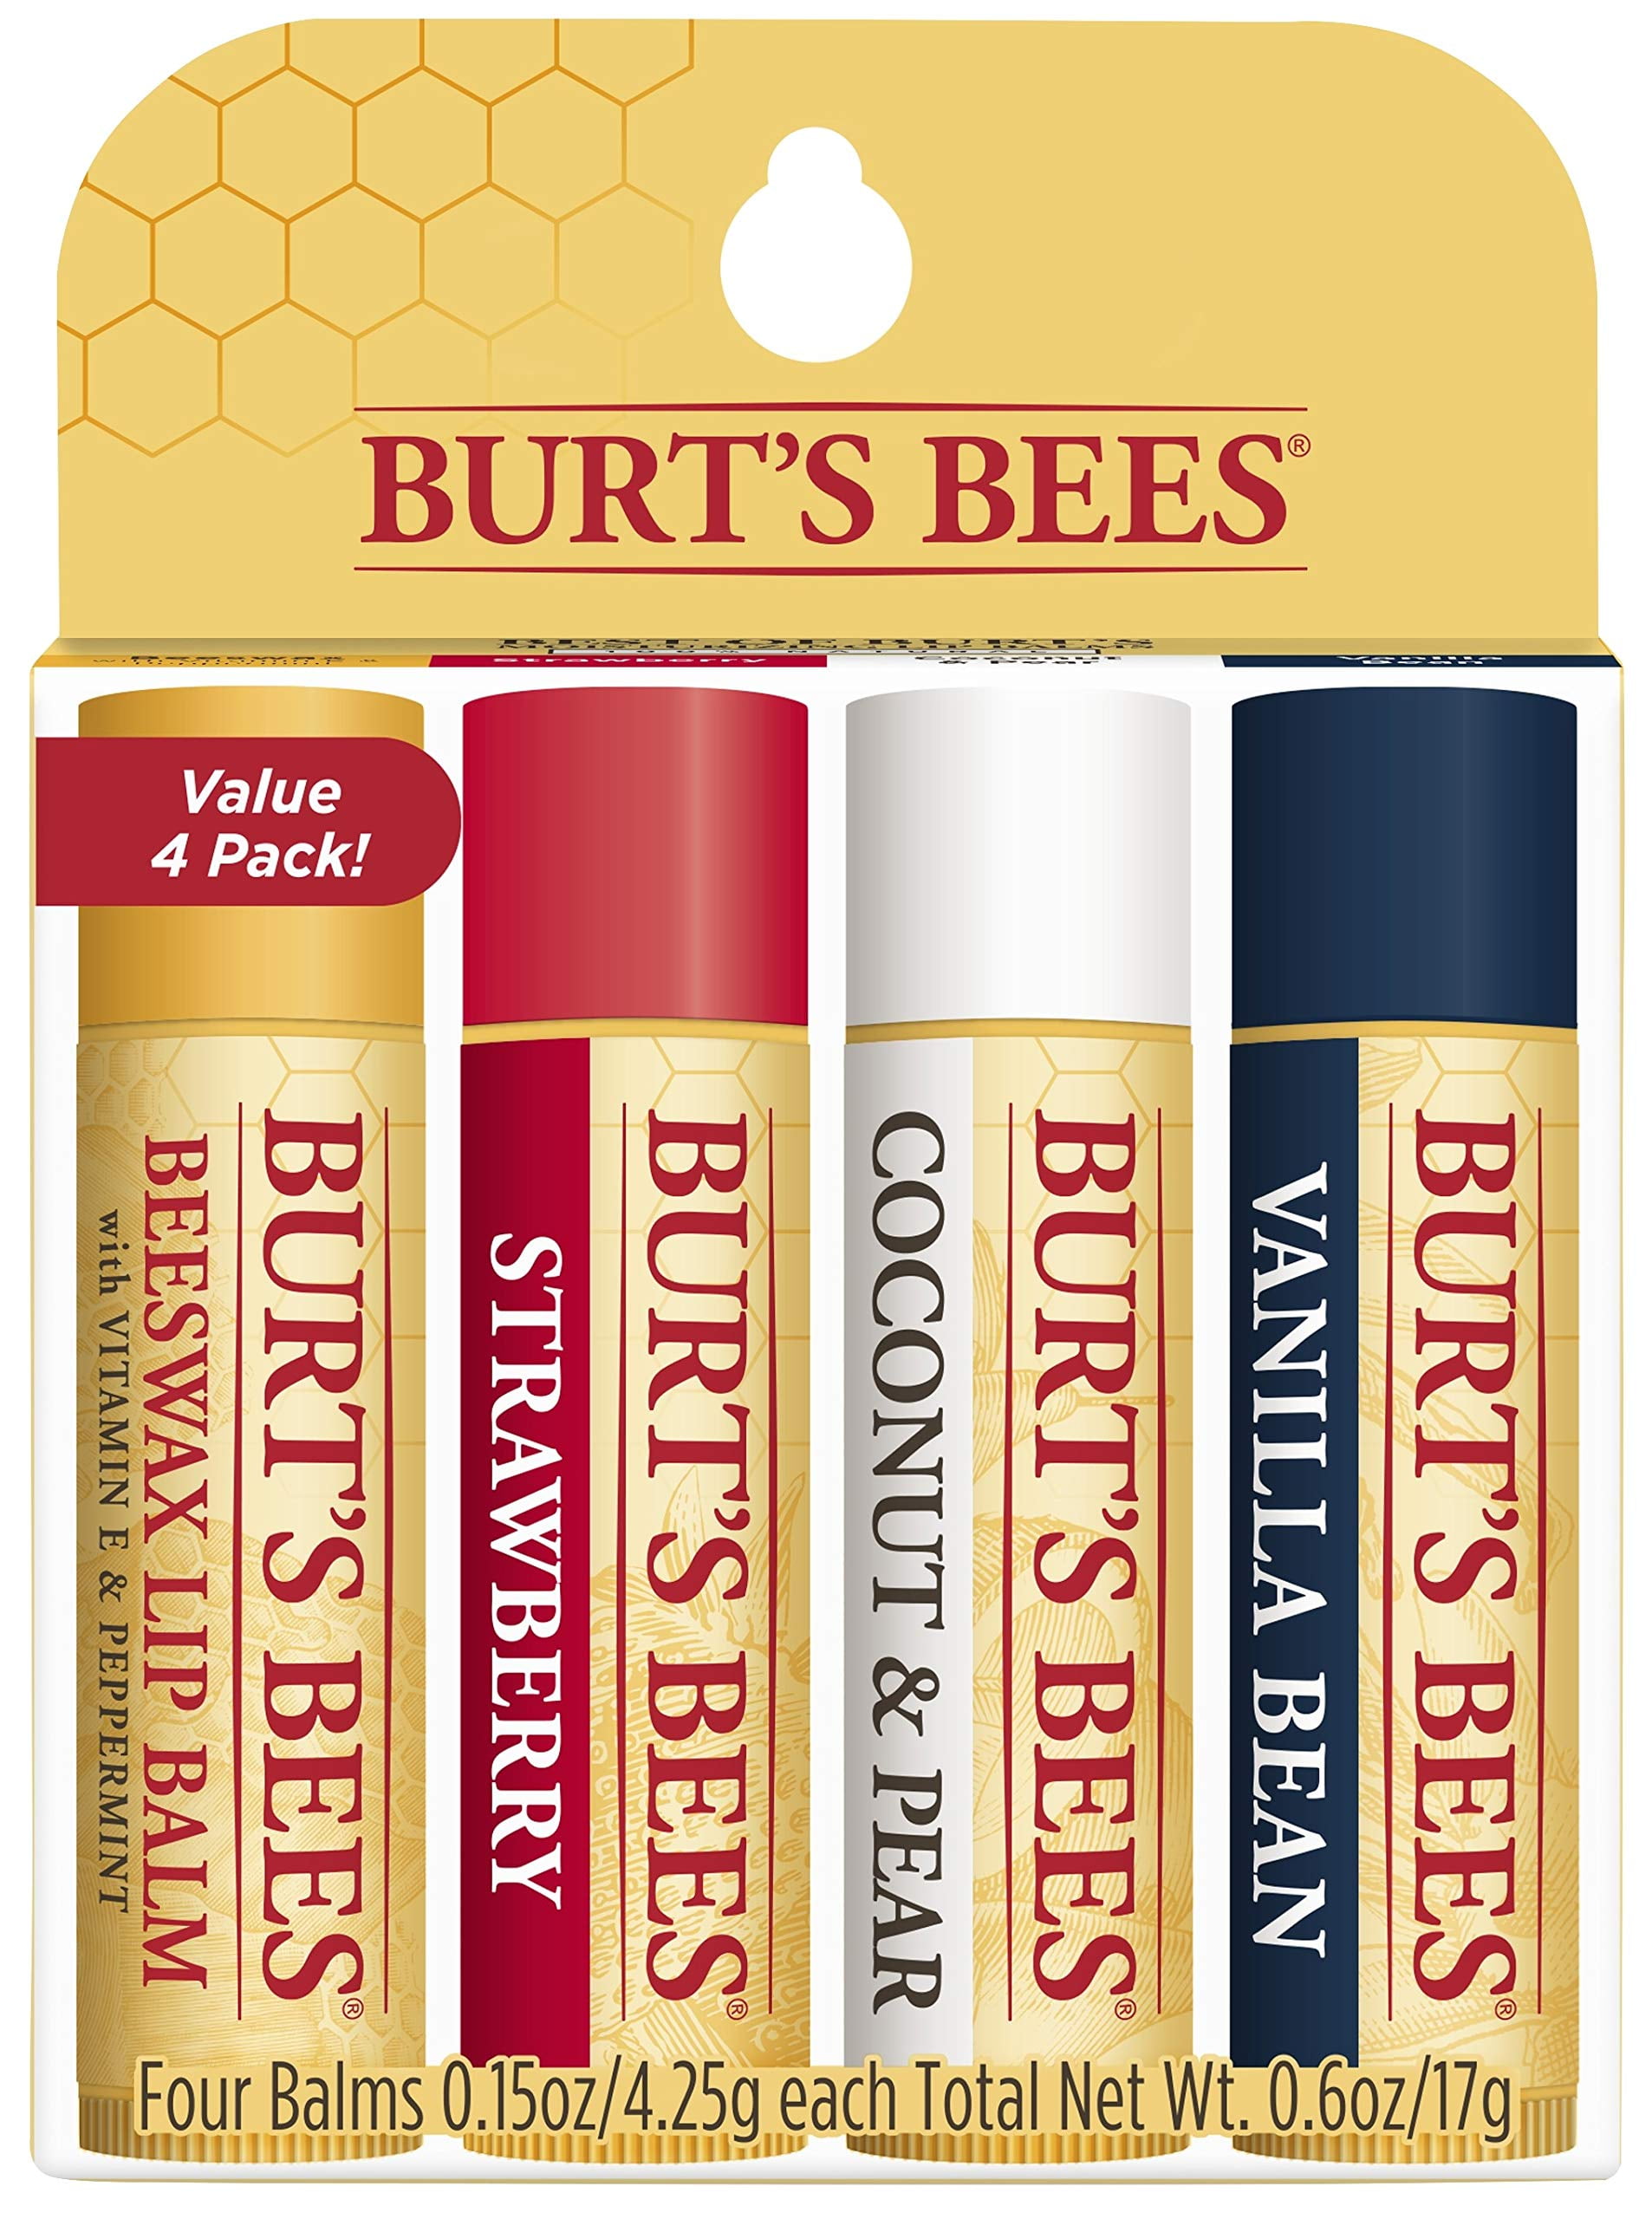 Burt's Bees Beeswax Lip Balm with Vitamin E & Peppermint 0.15 oz (Pack of 6)